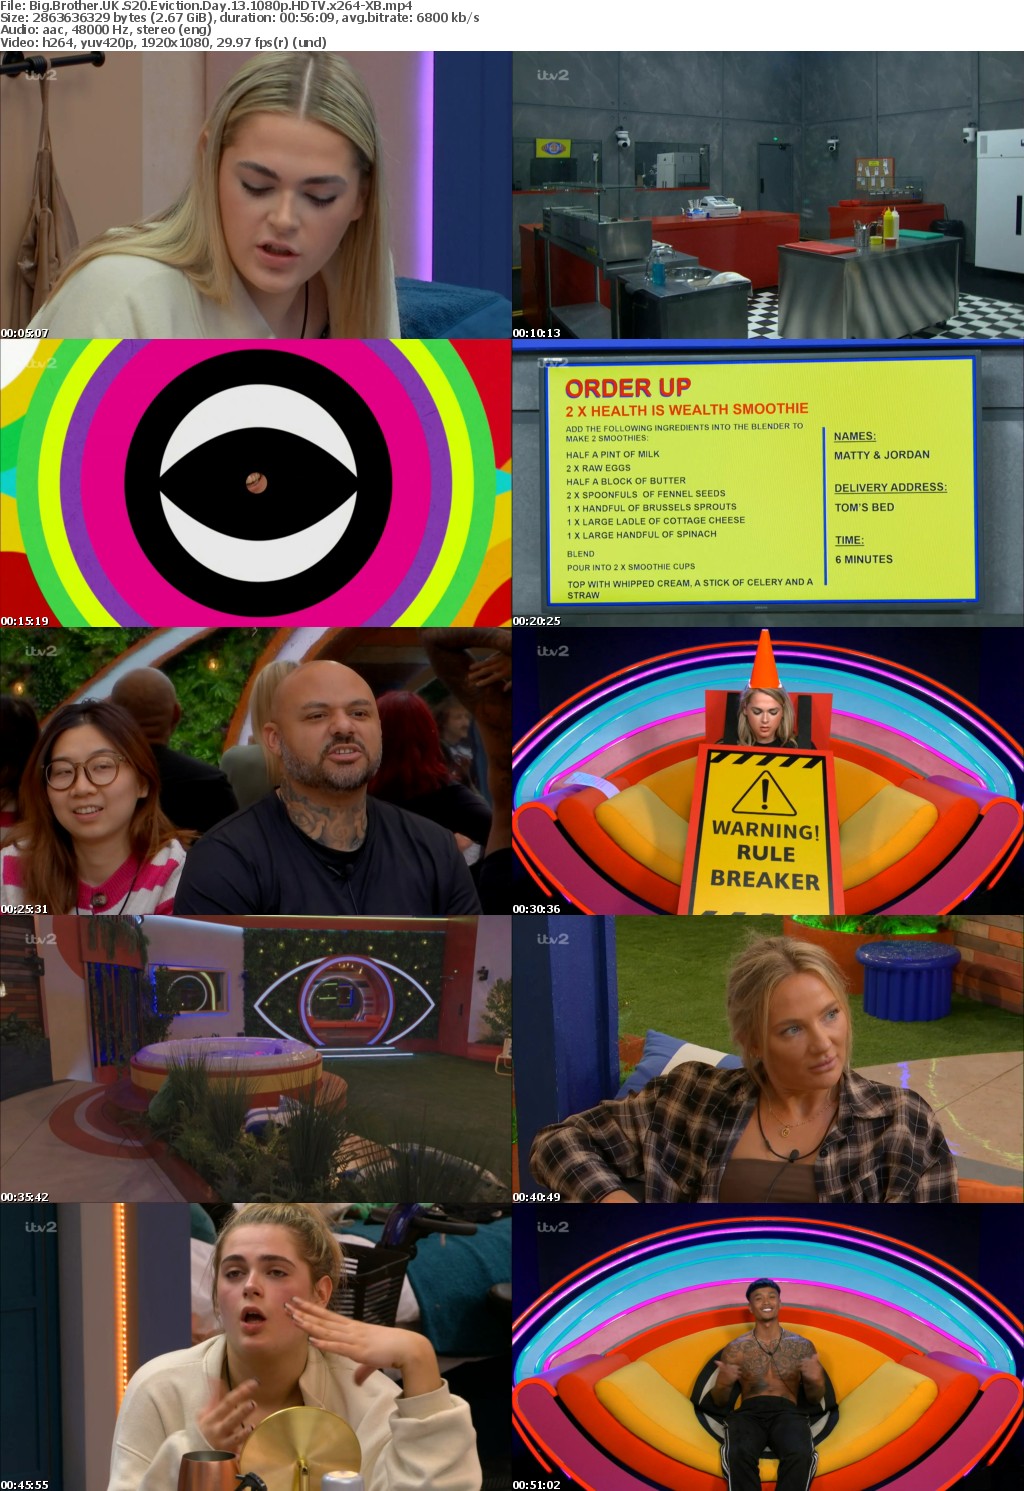 Big Brother UK S20 Eviction Day 13 1080p HDTV x264-XB